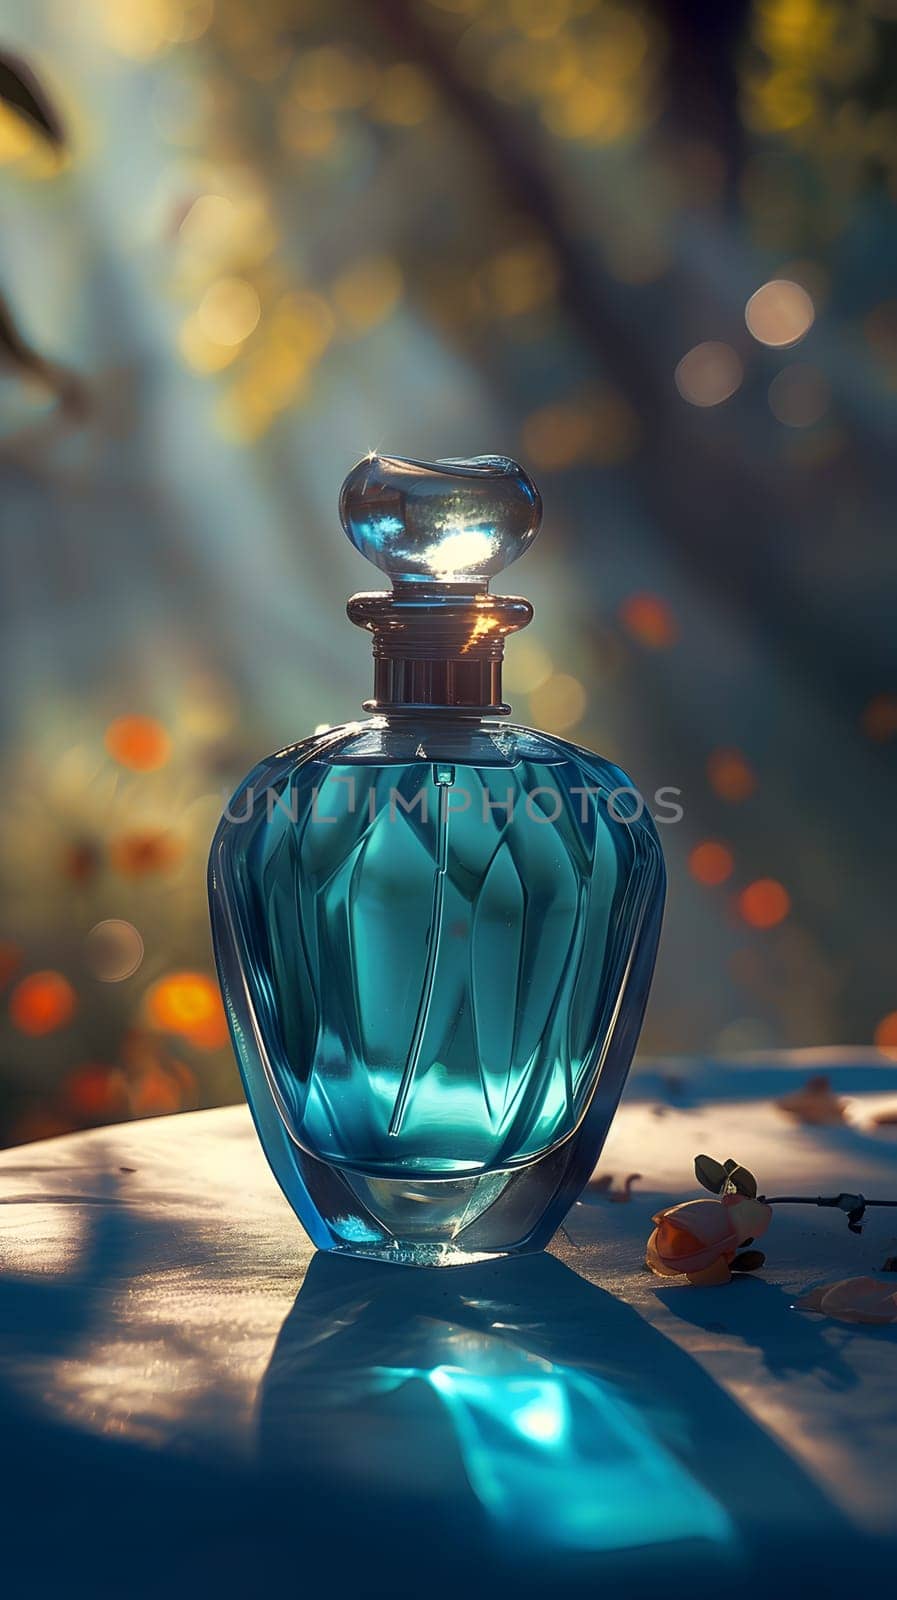 A blue perfume bottle rests on the table as a decorative piece by Nadtochiy